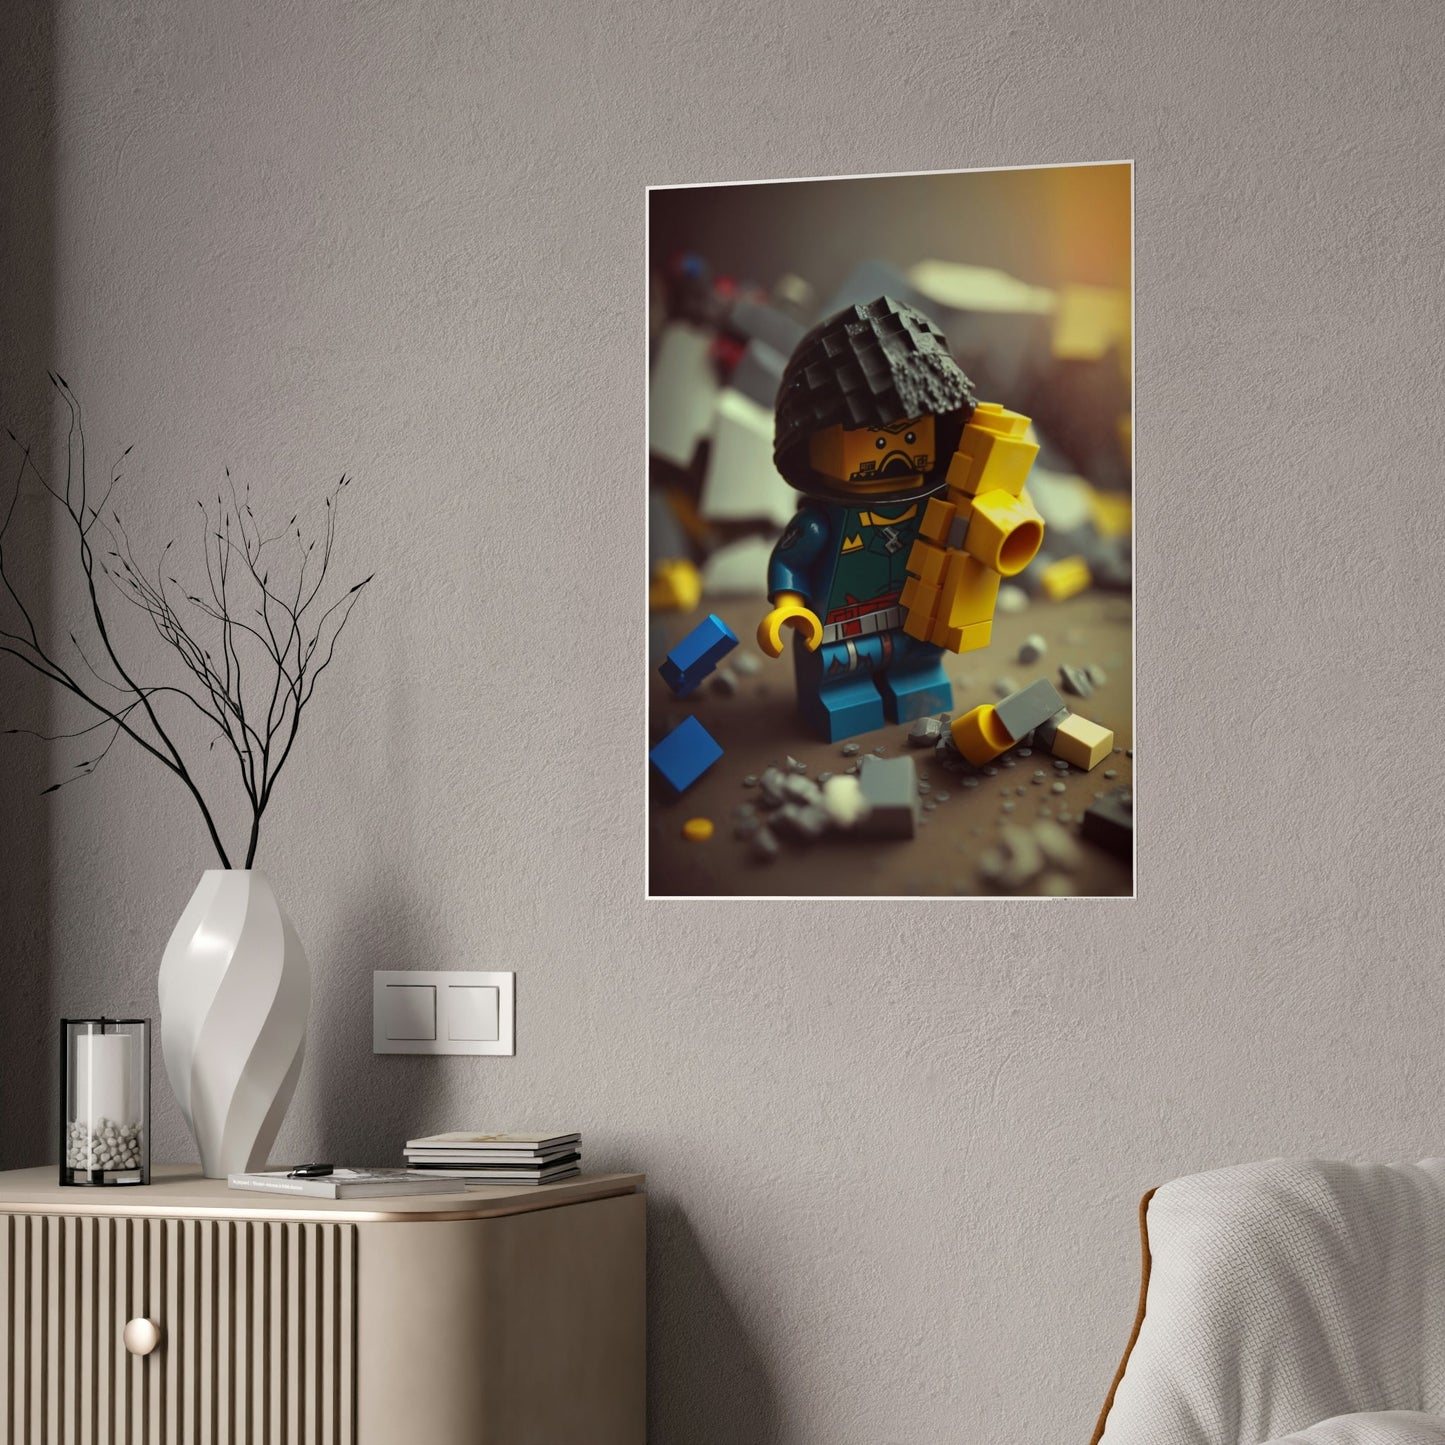 Creative Construction: Framed Canvas and Print of Lego Sculptures